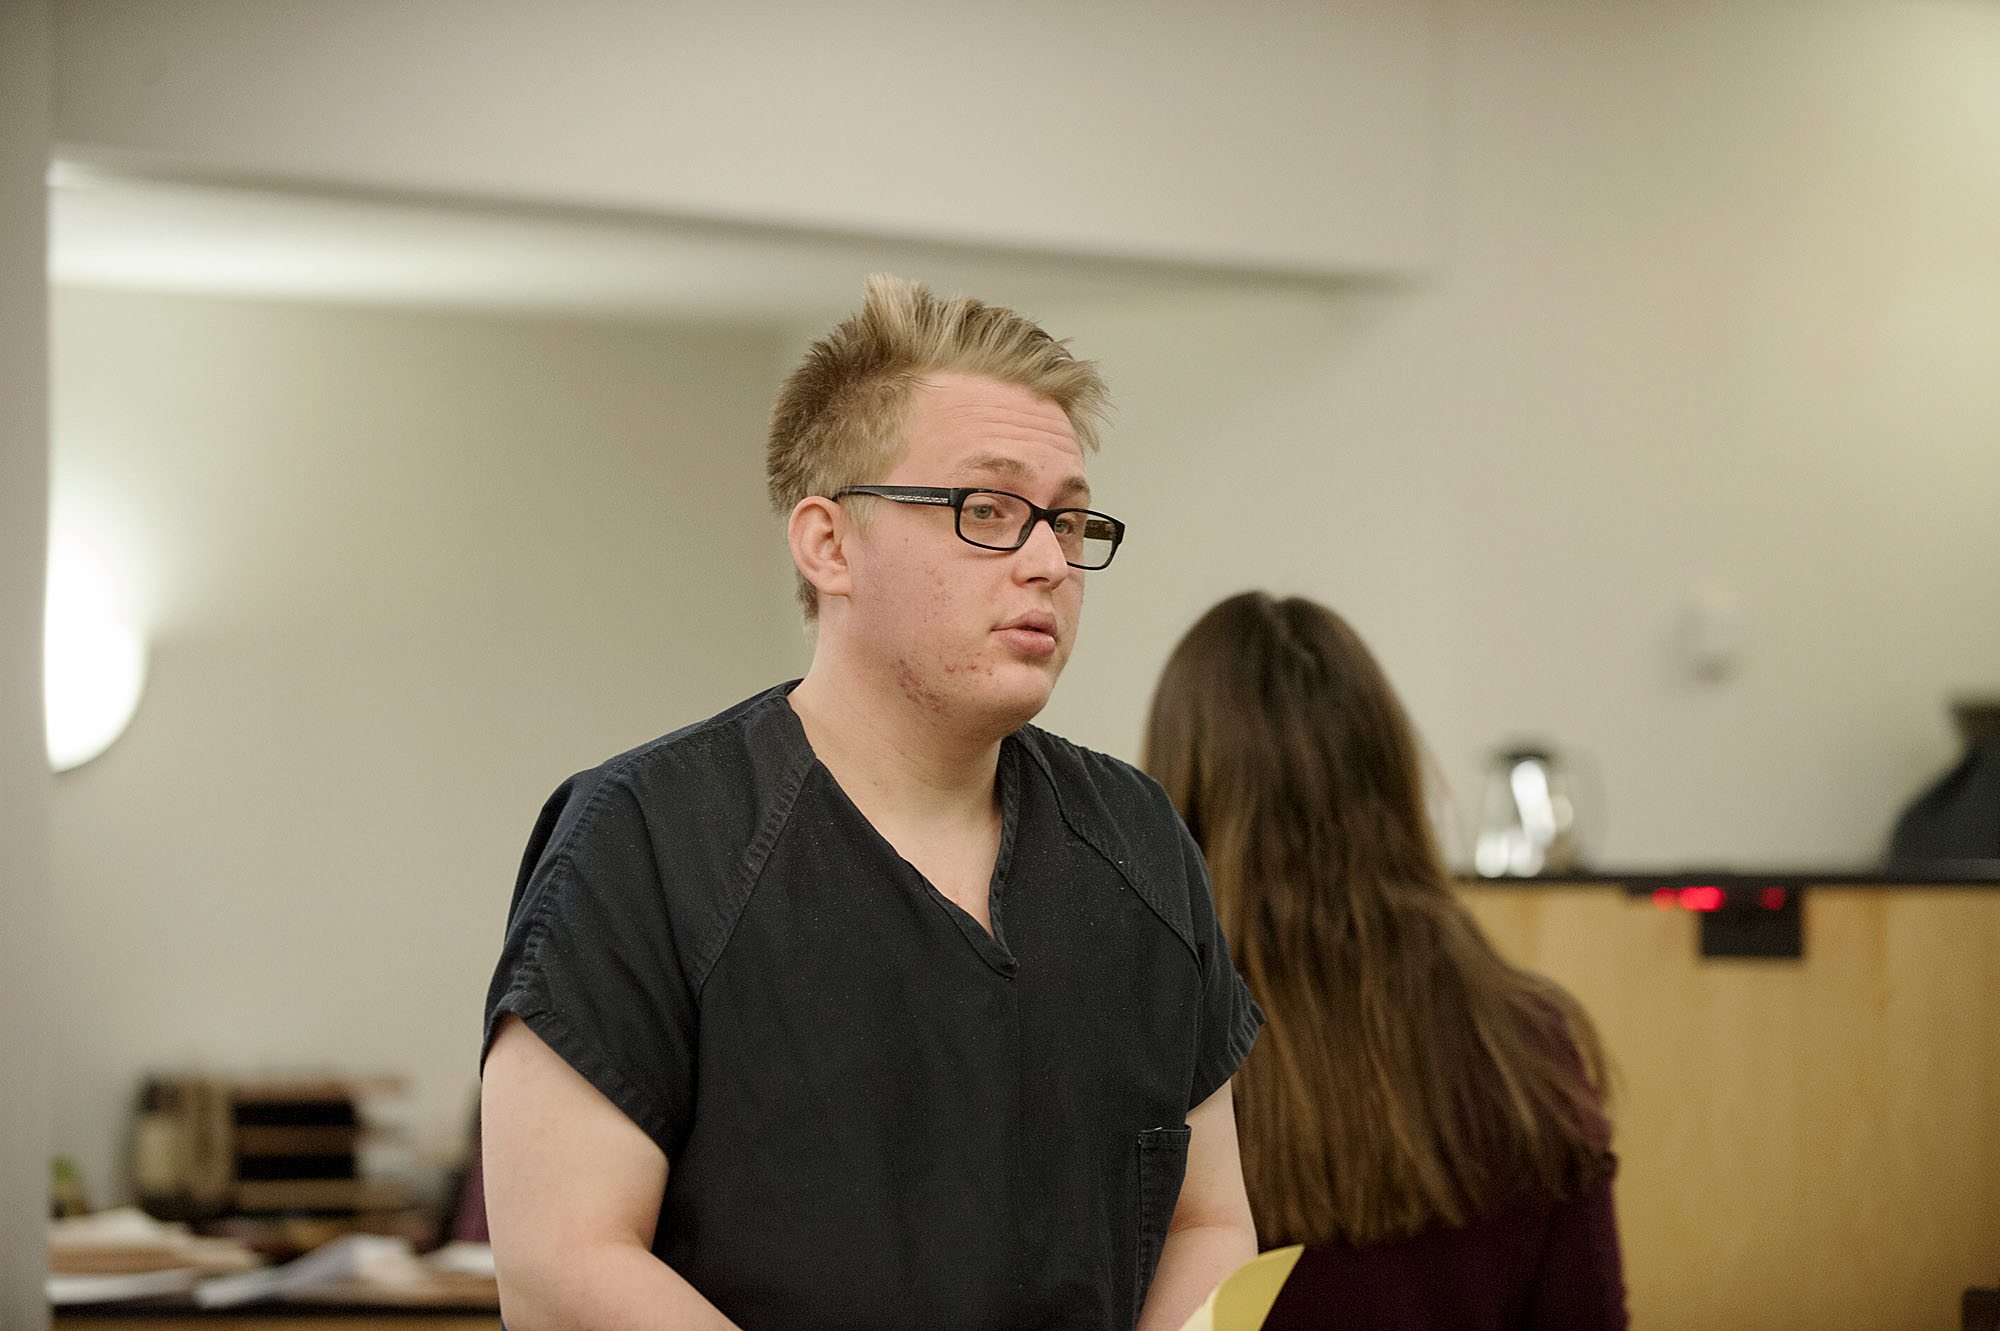 Zachary Akers, 20, of Camas makes an appearance Jan. 6 in Clark County Superior Court in a child pornography and online child exploitation case. Akers was back in court Tuesday to face new allegations.